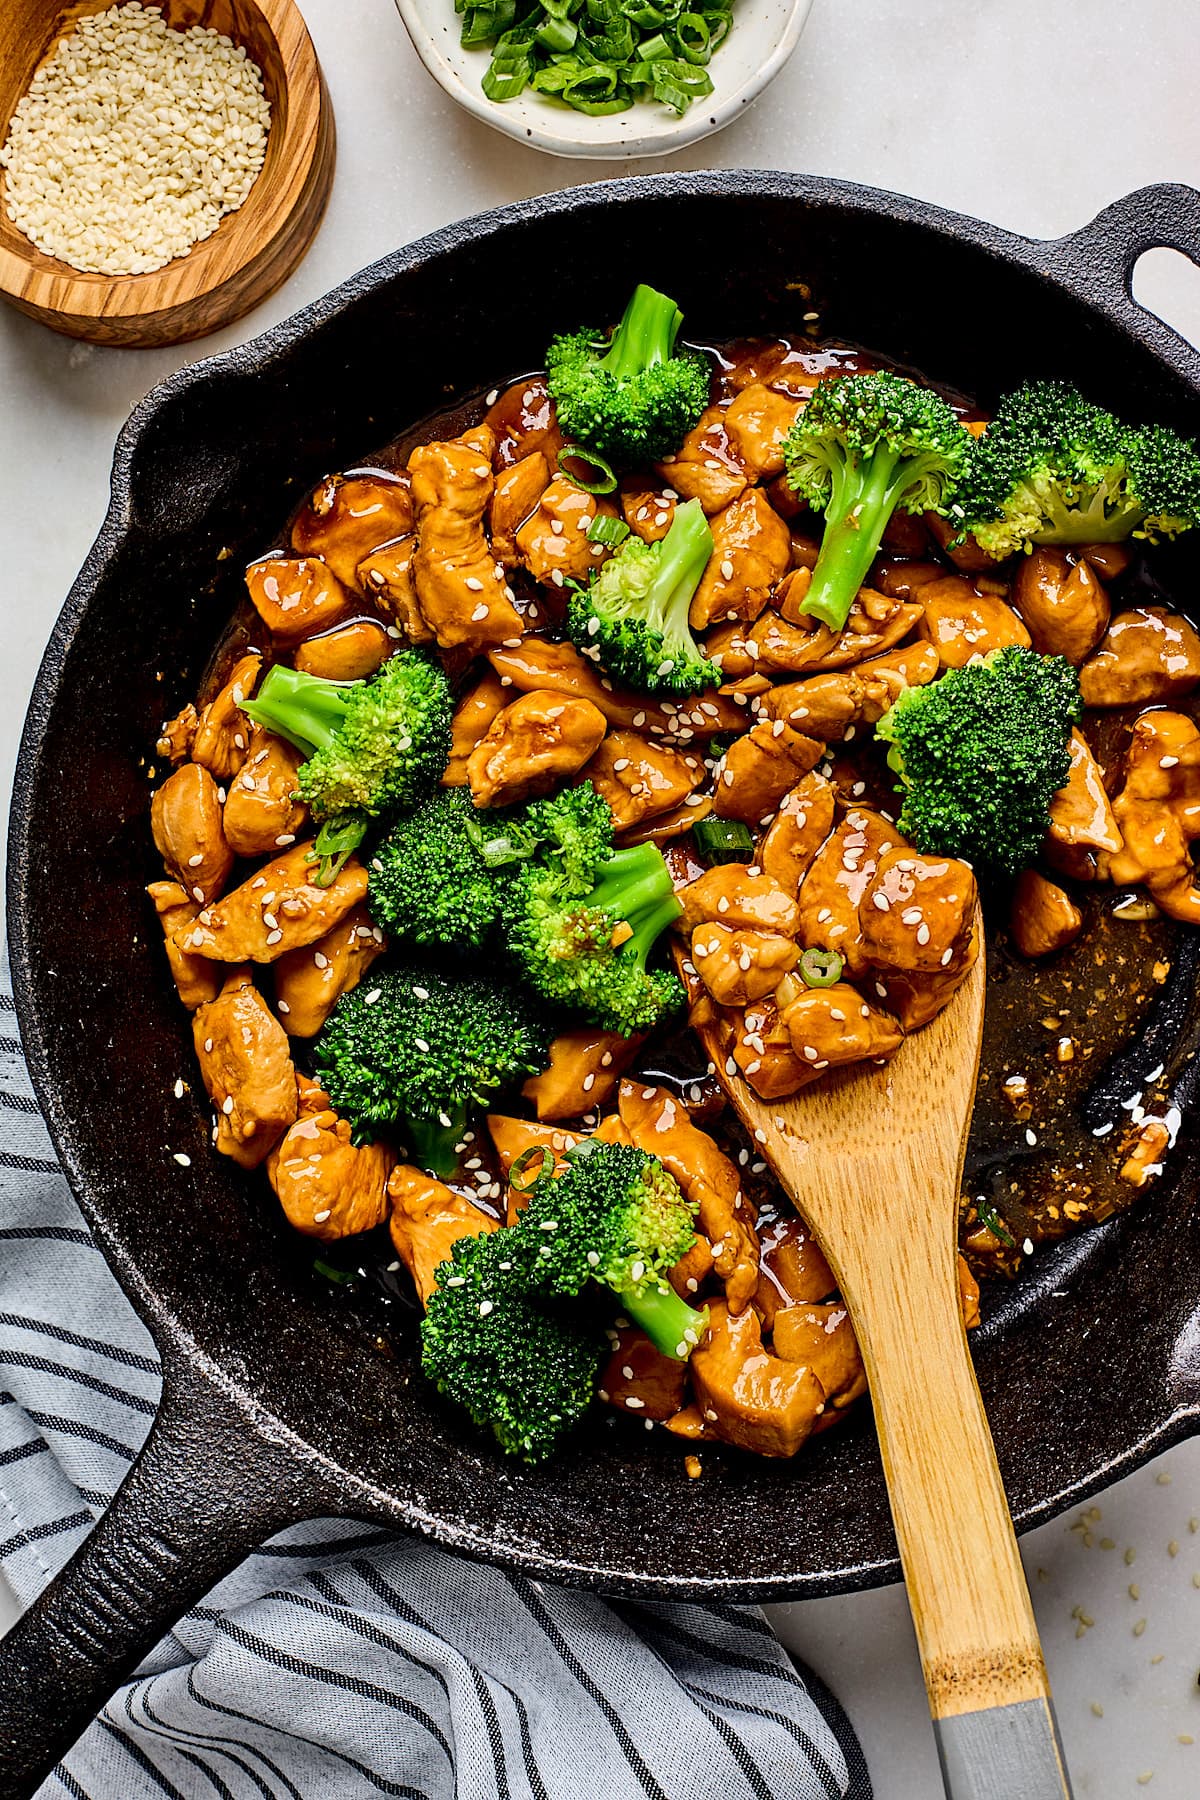 teriyaki chicken in skillet with broccoli and wooden spoon